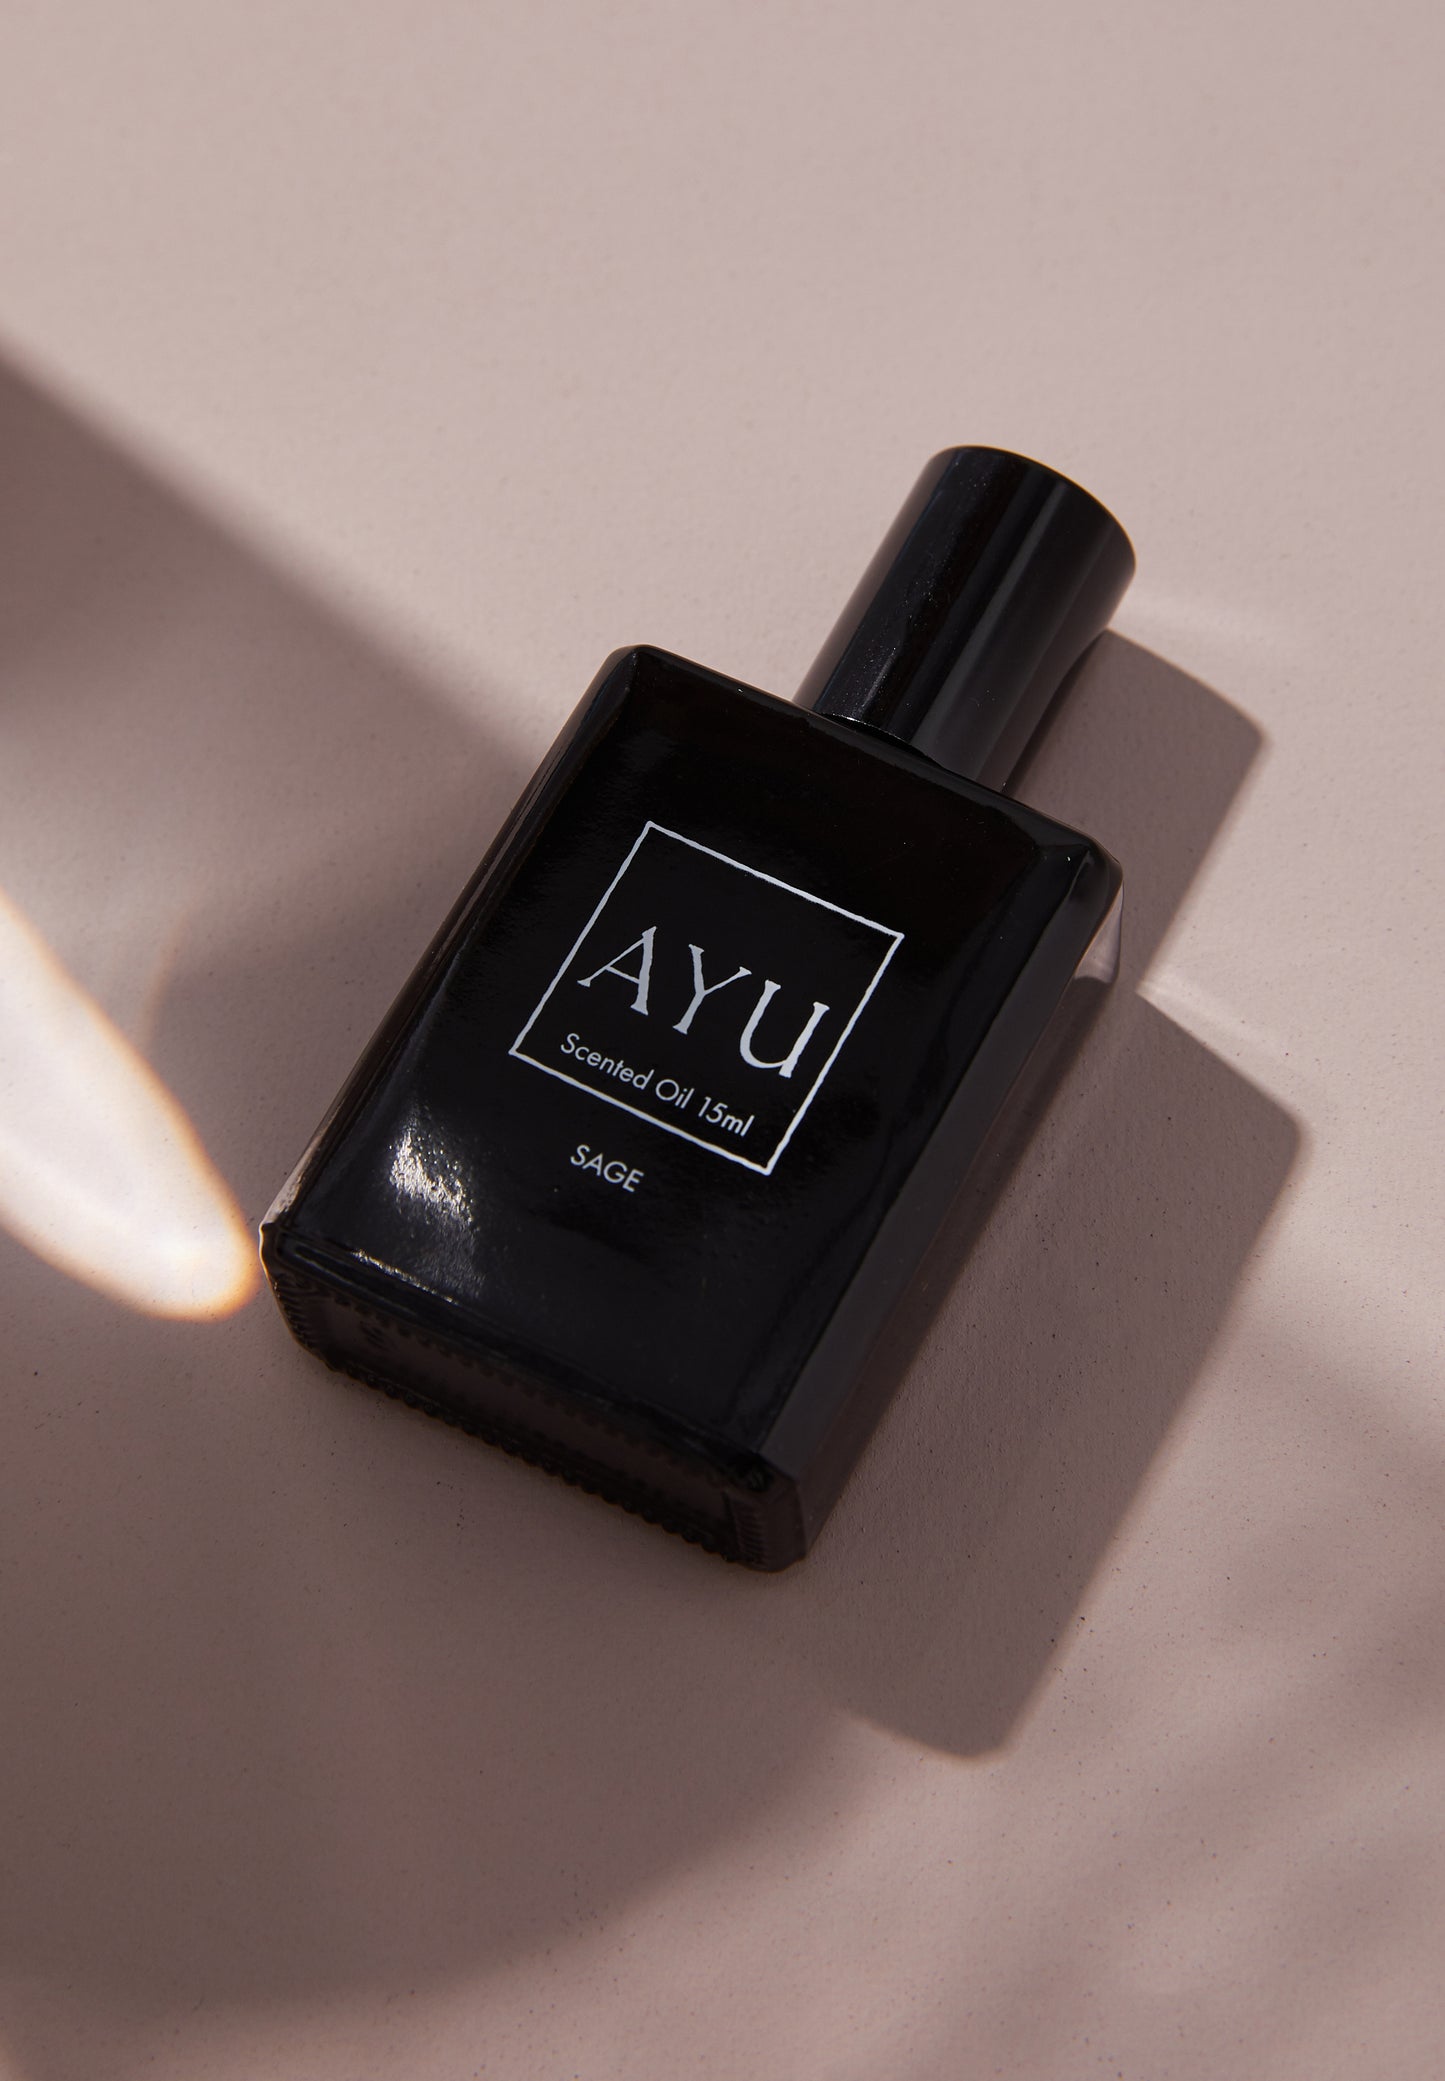 AYU Scented Perfume Oil - Sage